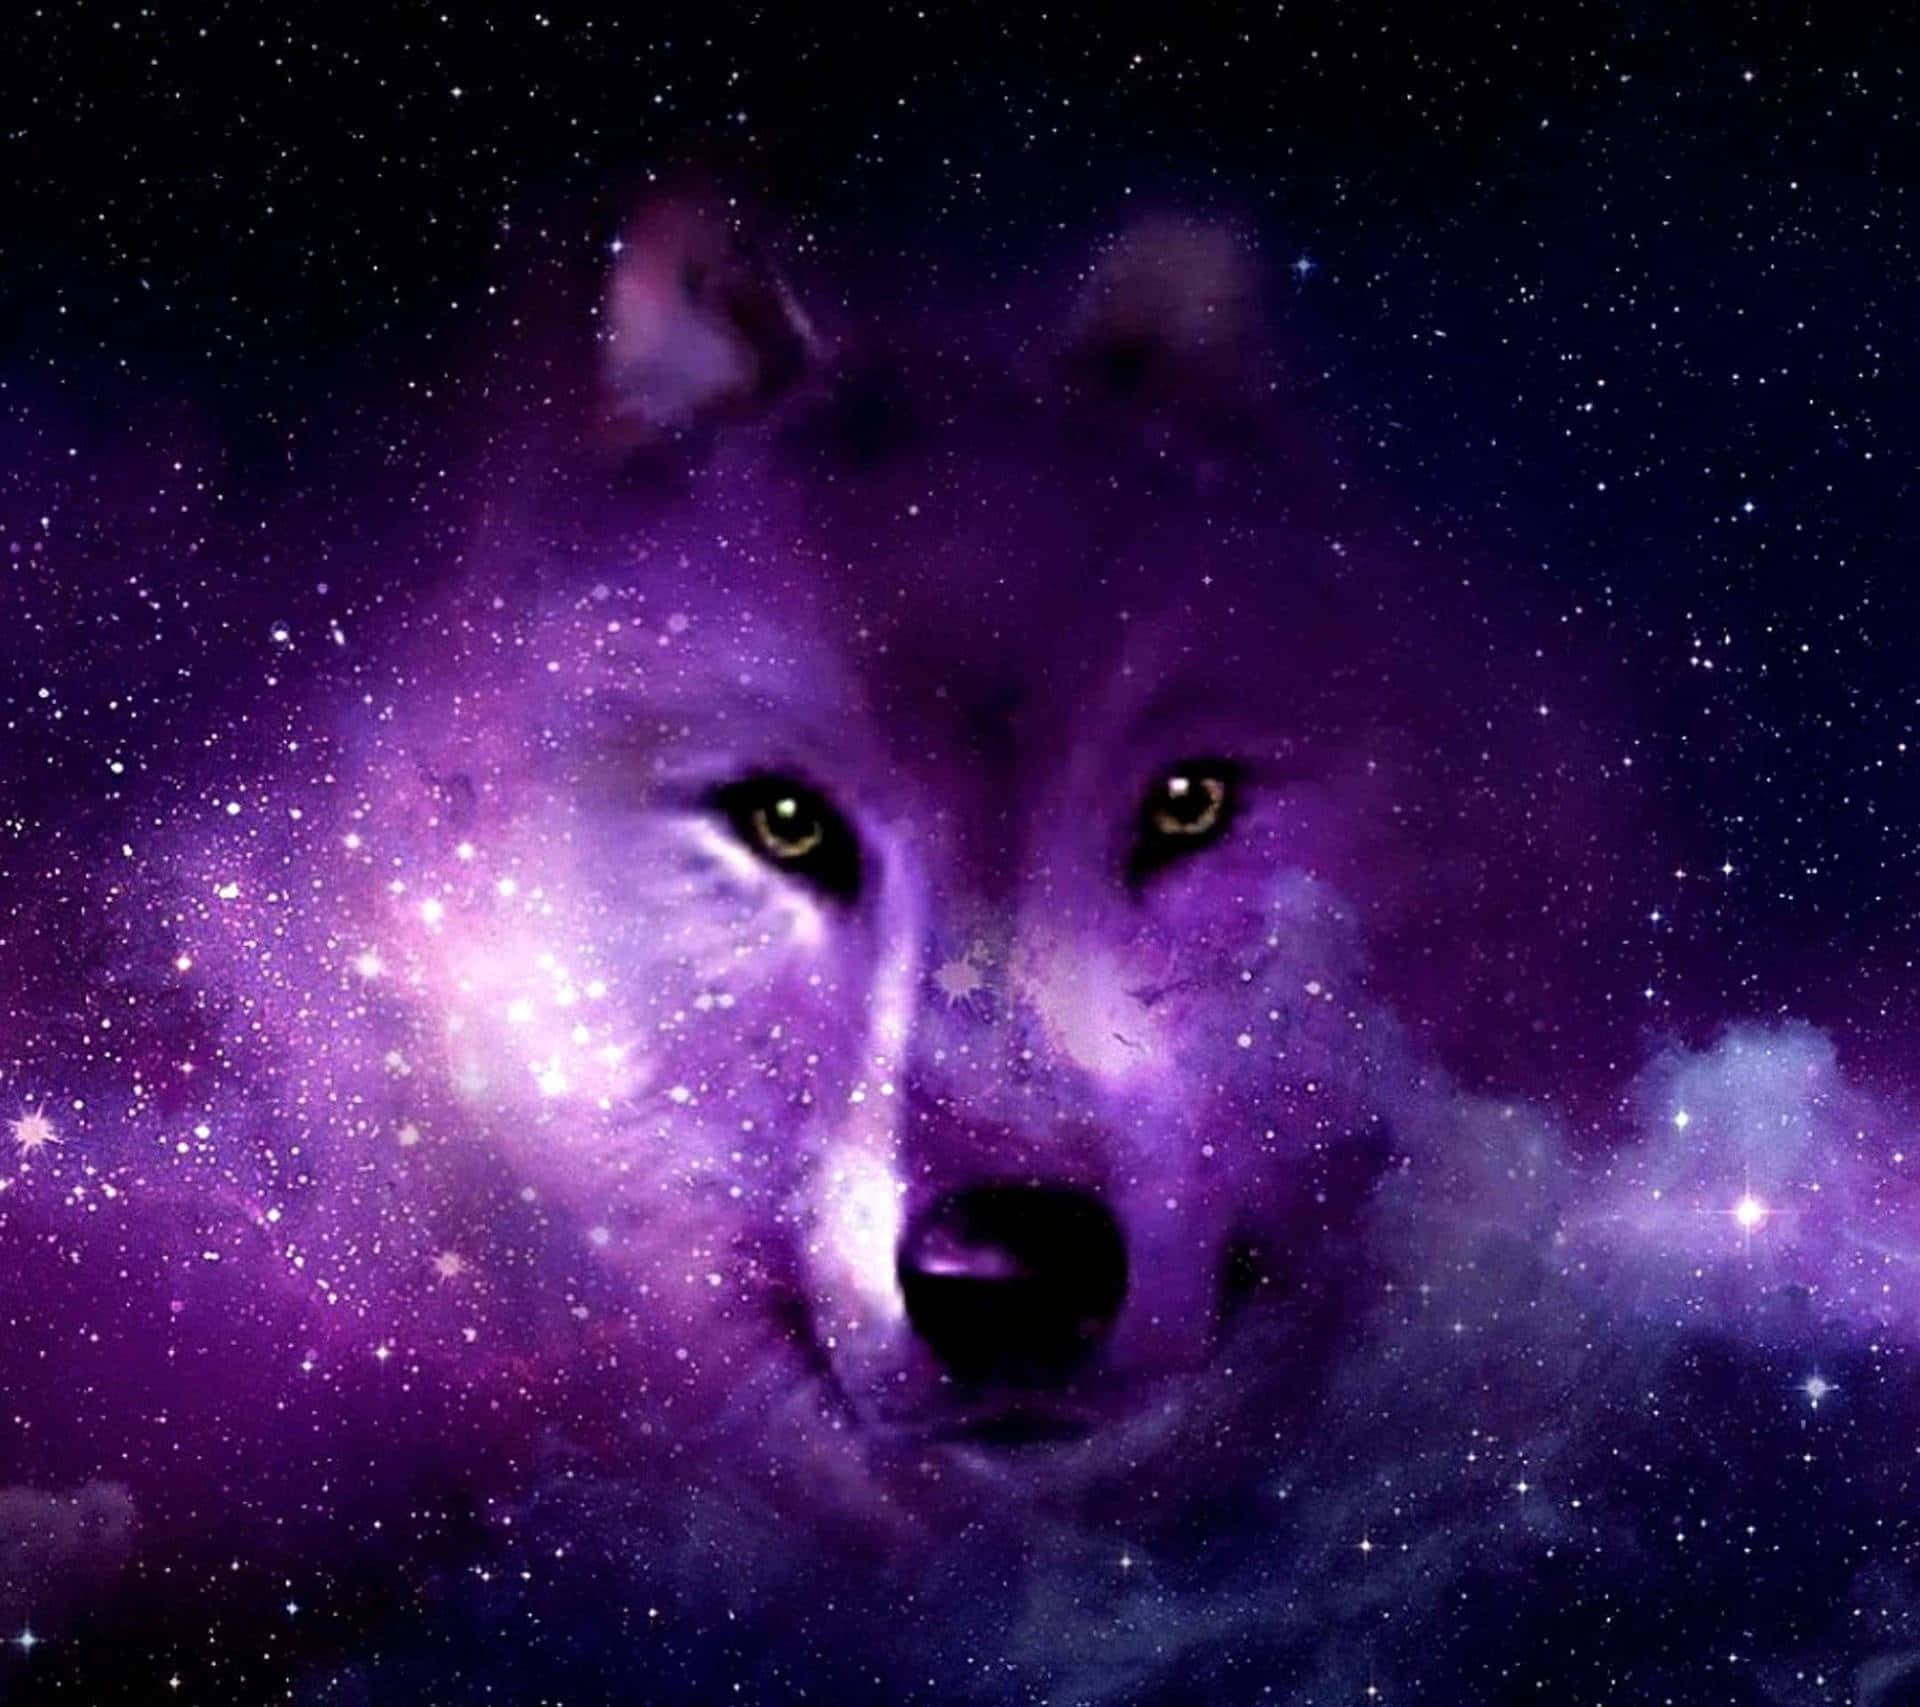 "Explore The Mysteries Of The Galaxy With A Wolf By Your Side"